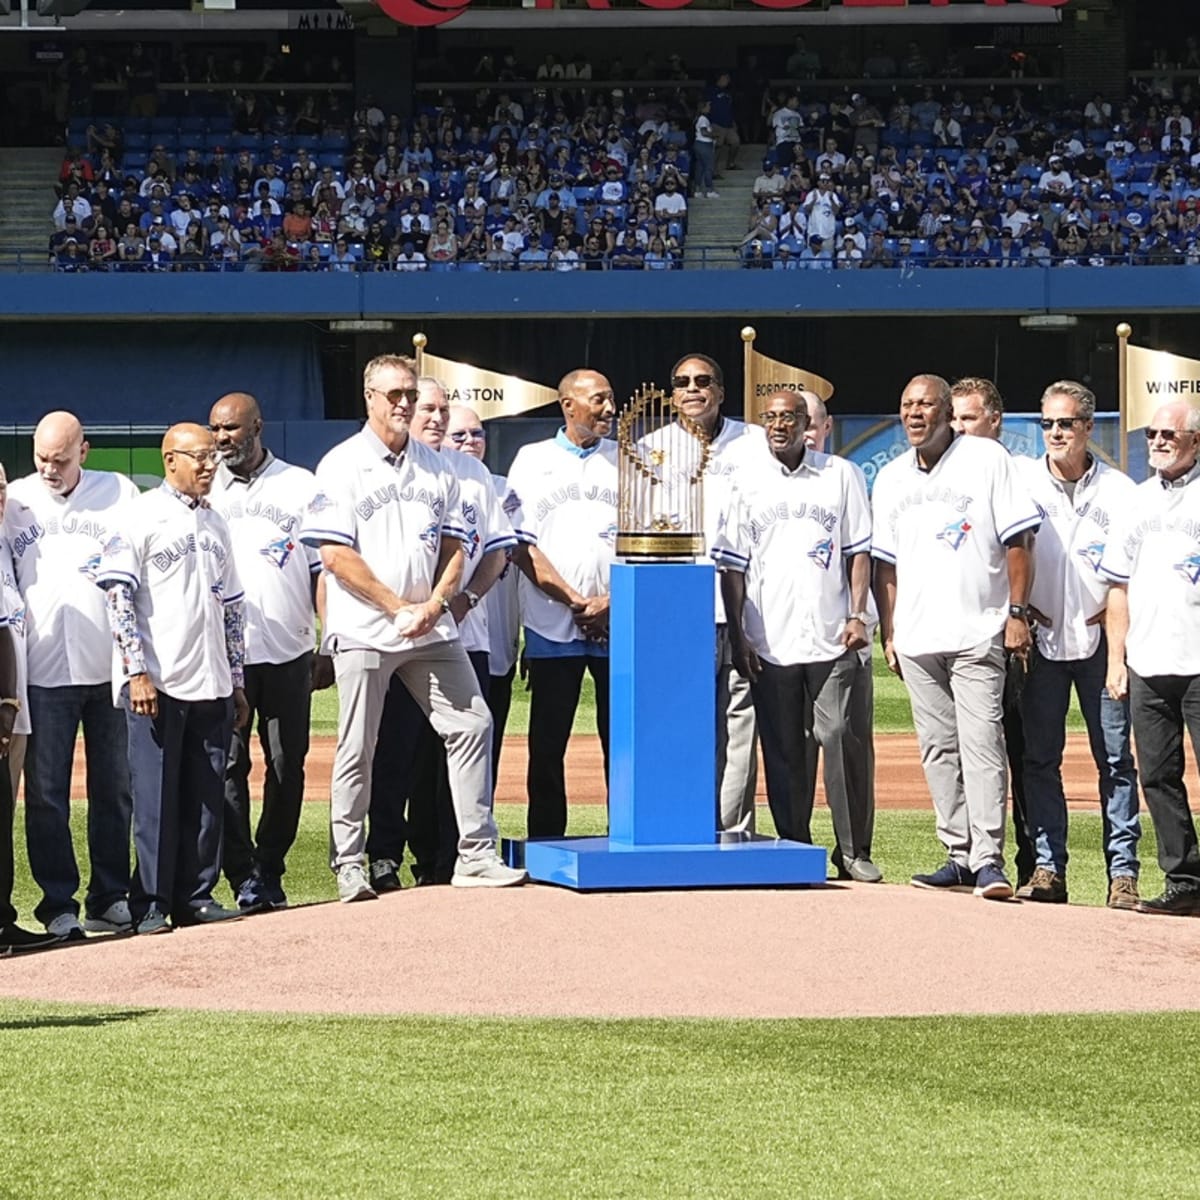 92 Blue Jays On What It Takes to Bring World Series to Toronto